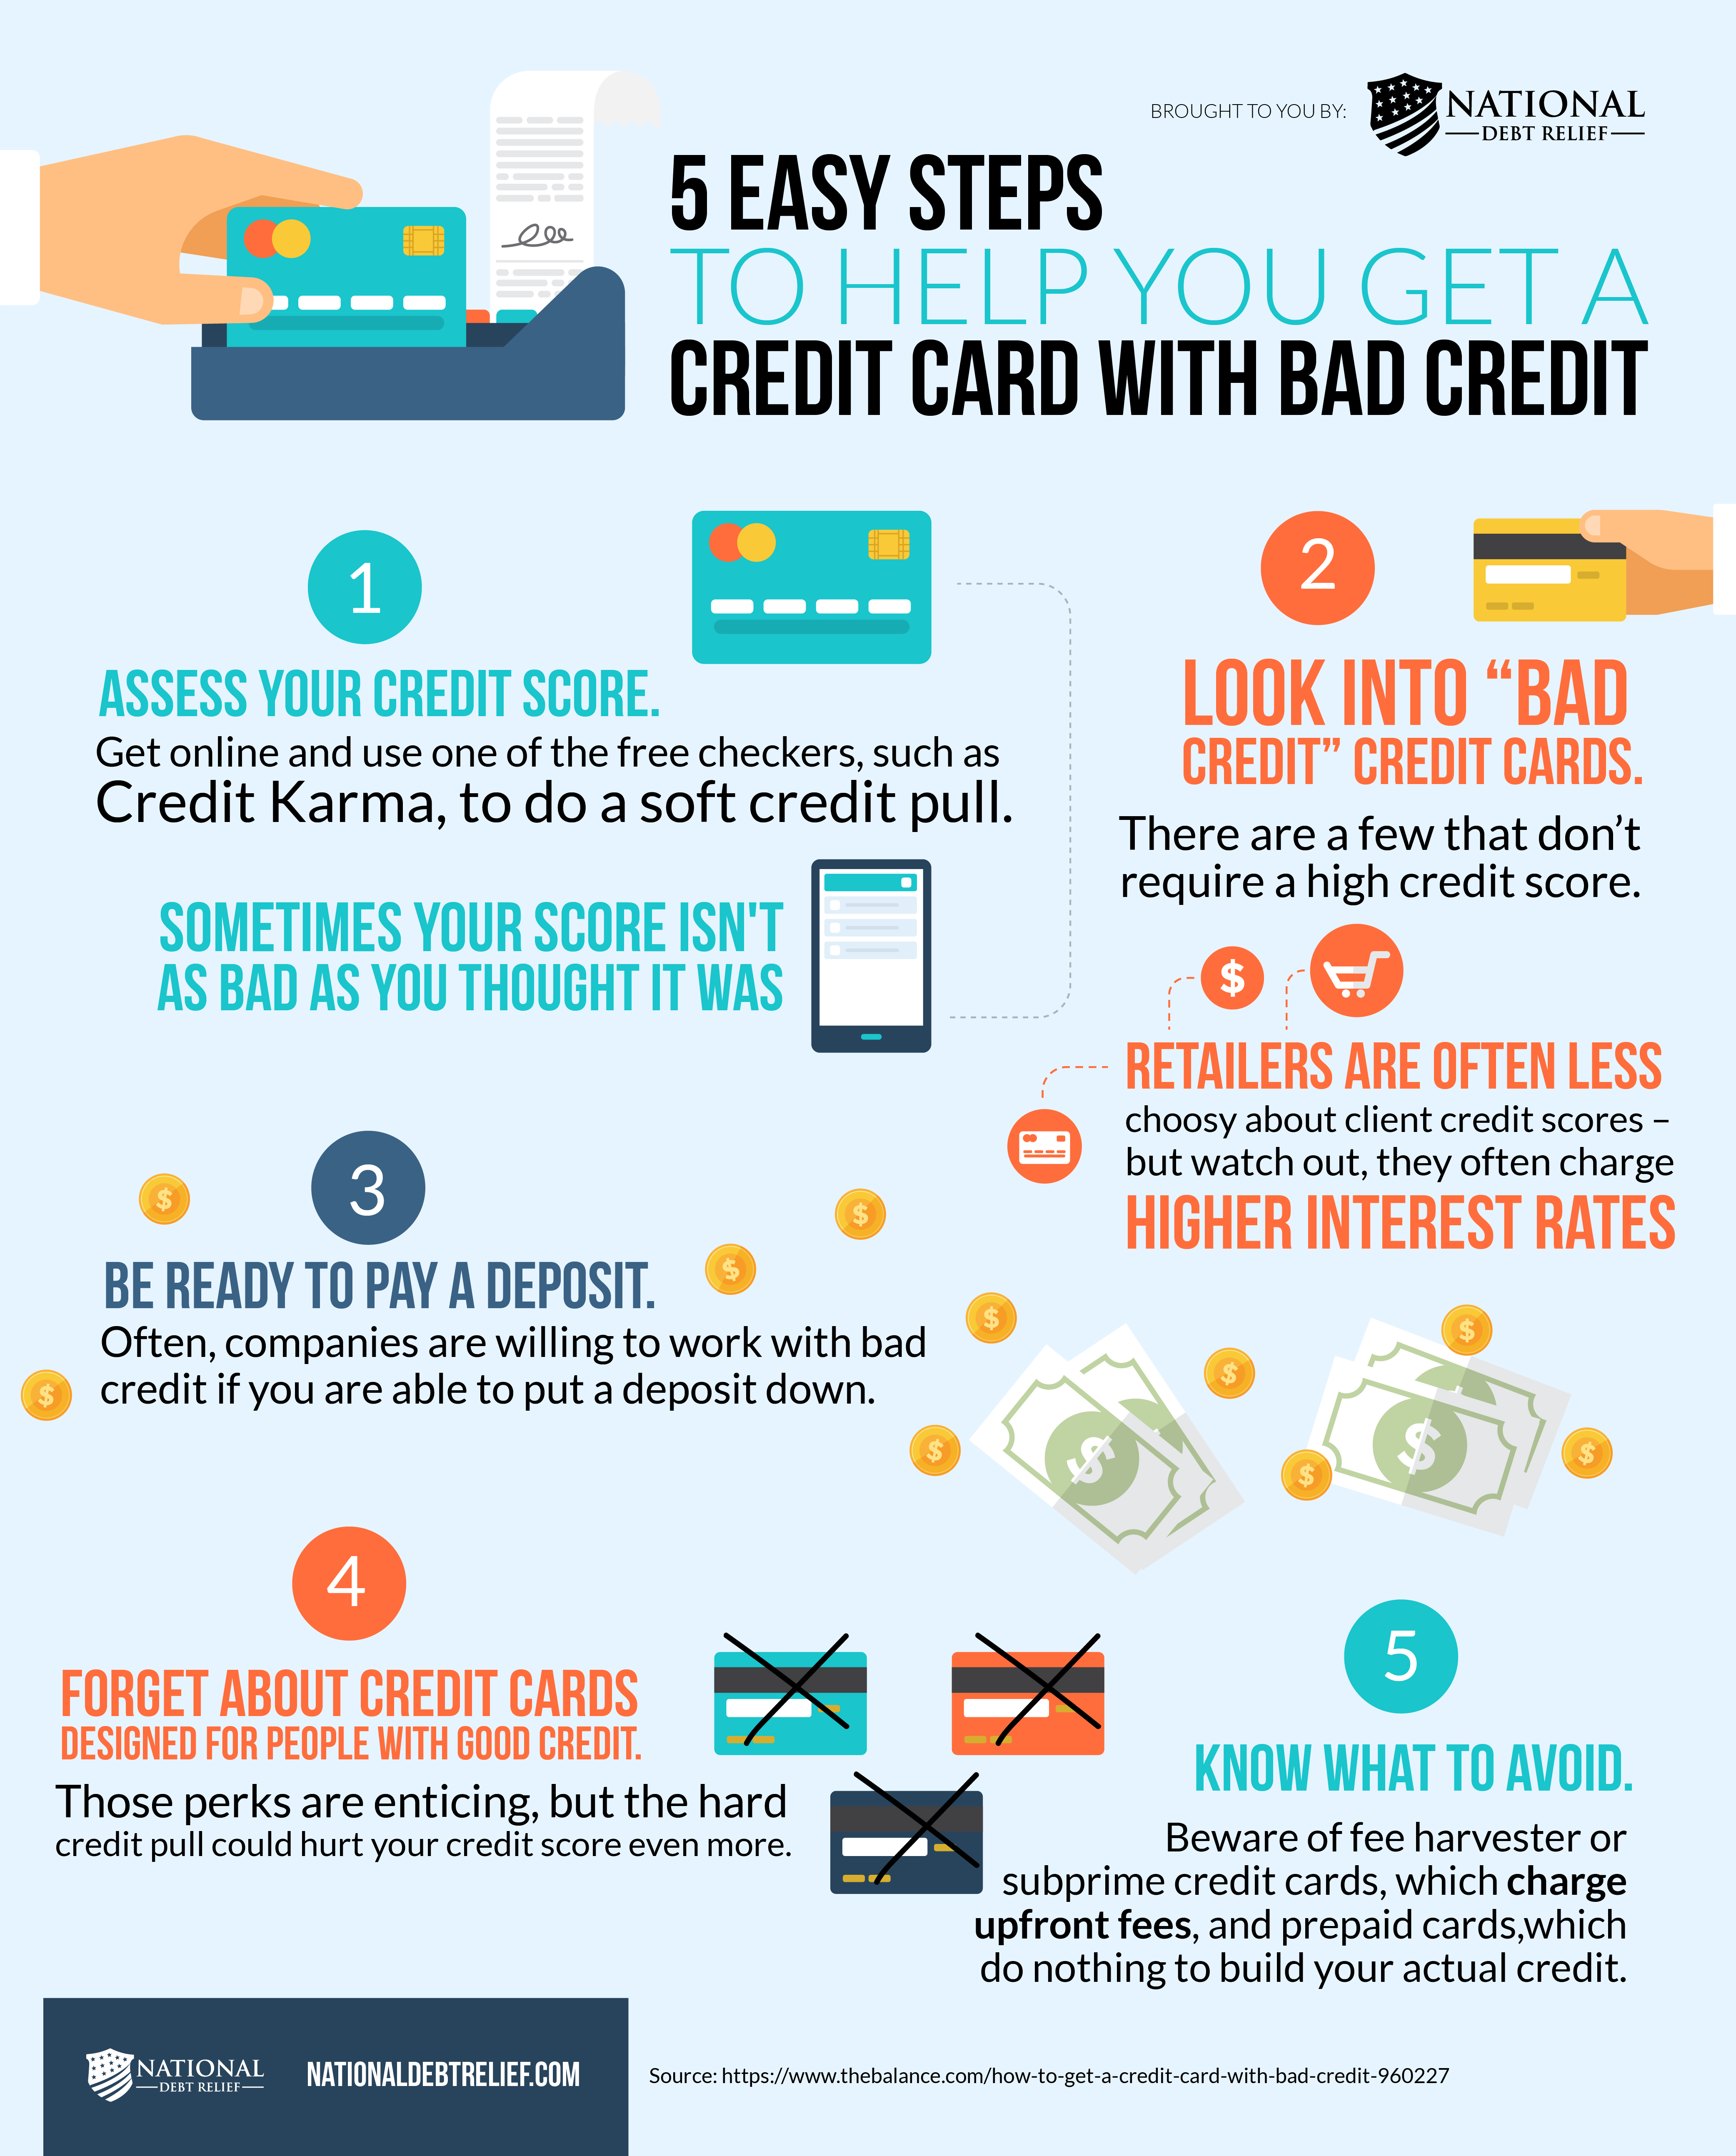 5 Easy Steps To Help You Get A Credit Card With Bad Credit